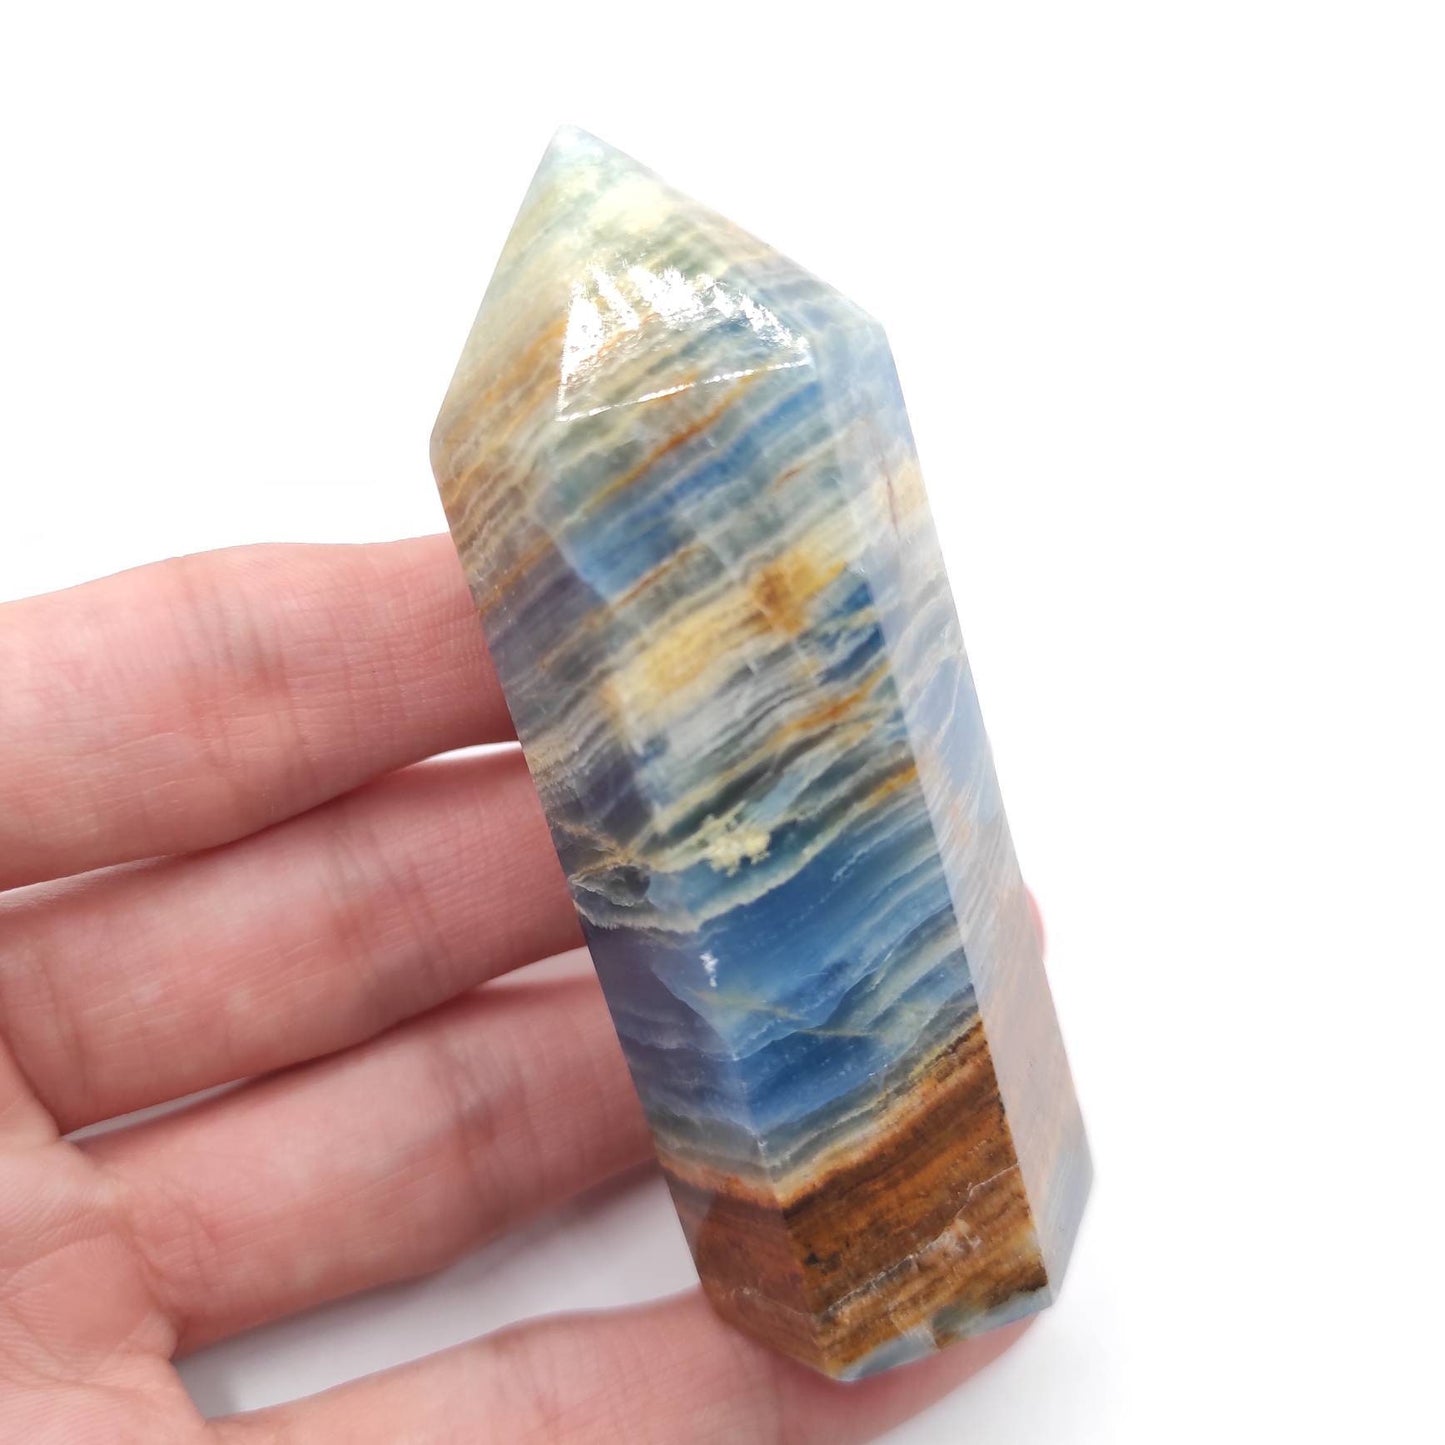 113g Aquatine Blue Calcite from Argentina - Lemurian Blue Calcite Tower - Crystal Point Tower - Natural Crystal Point - La Toma, San Luis